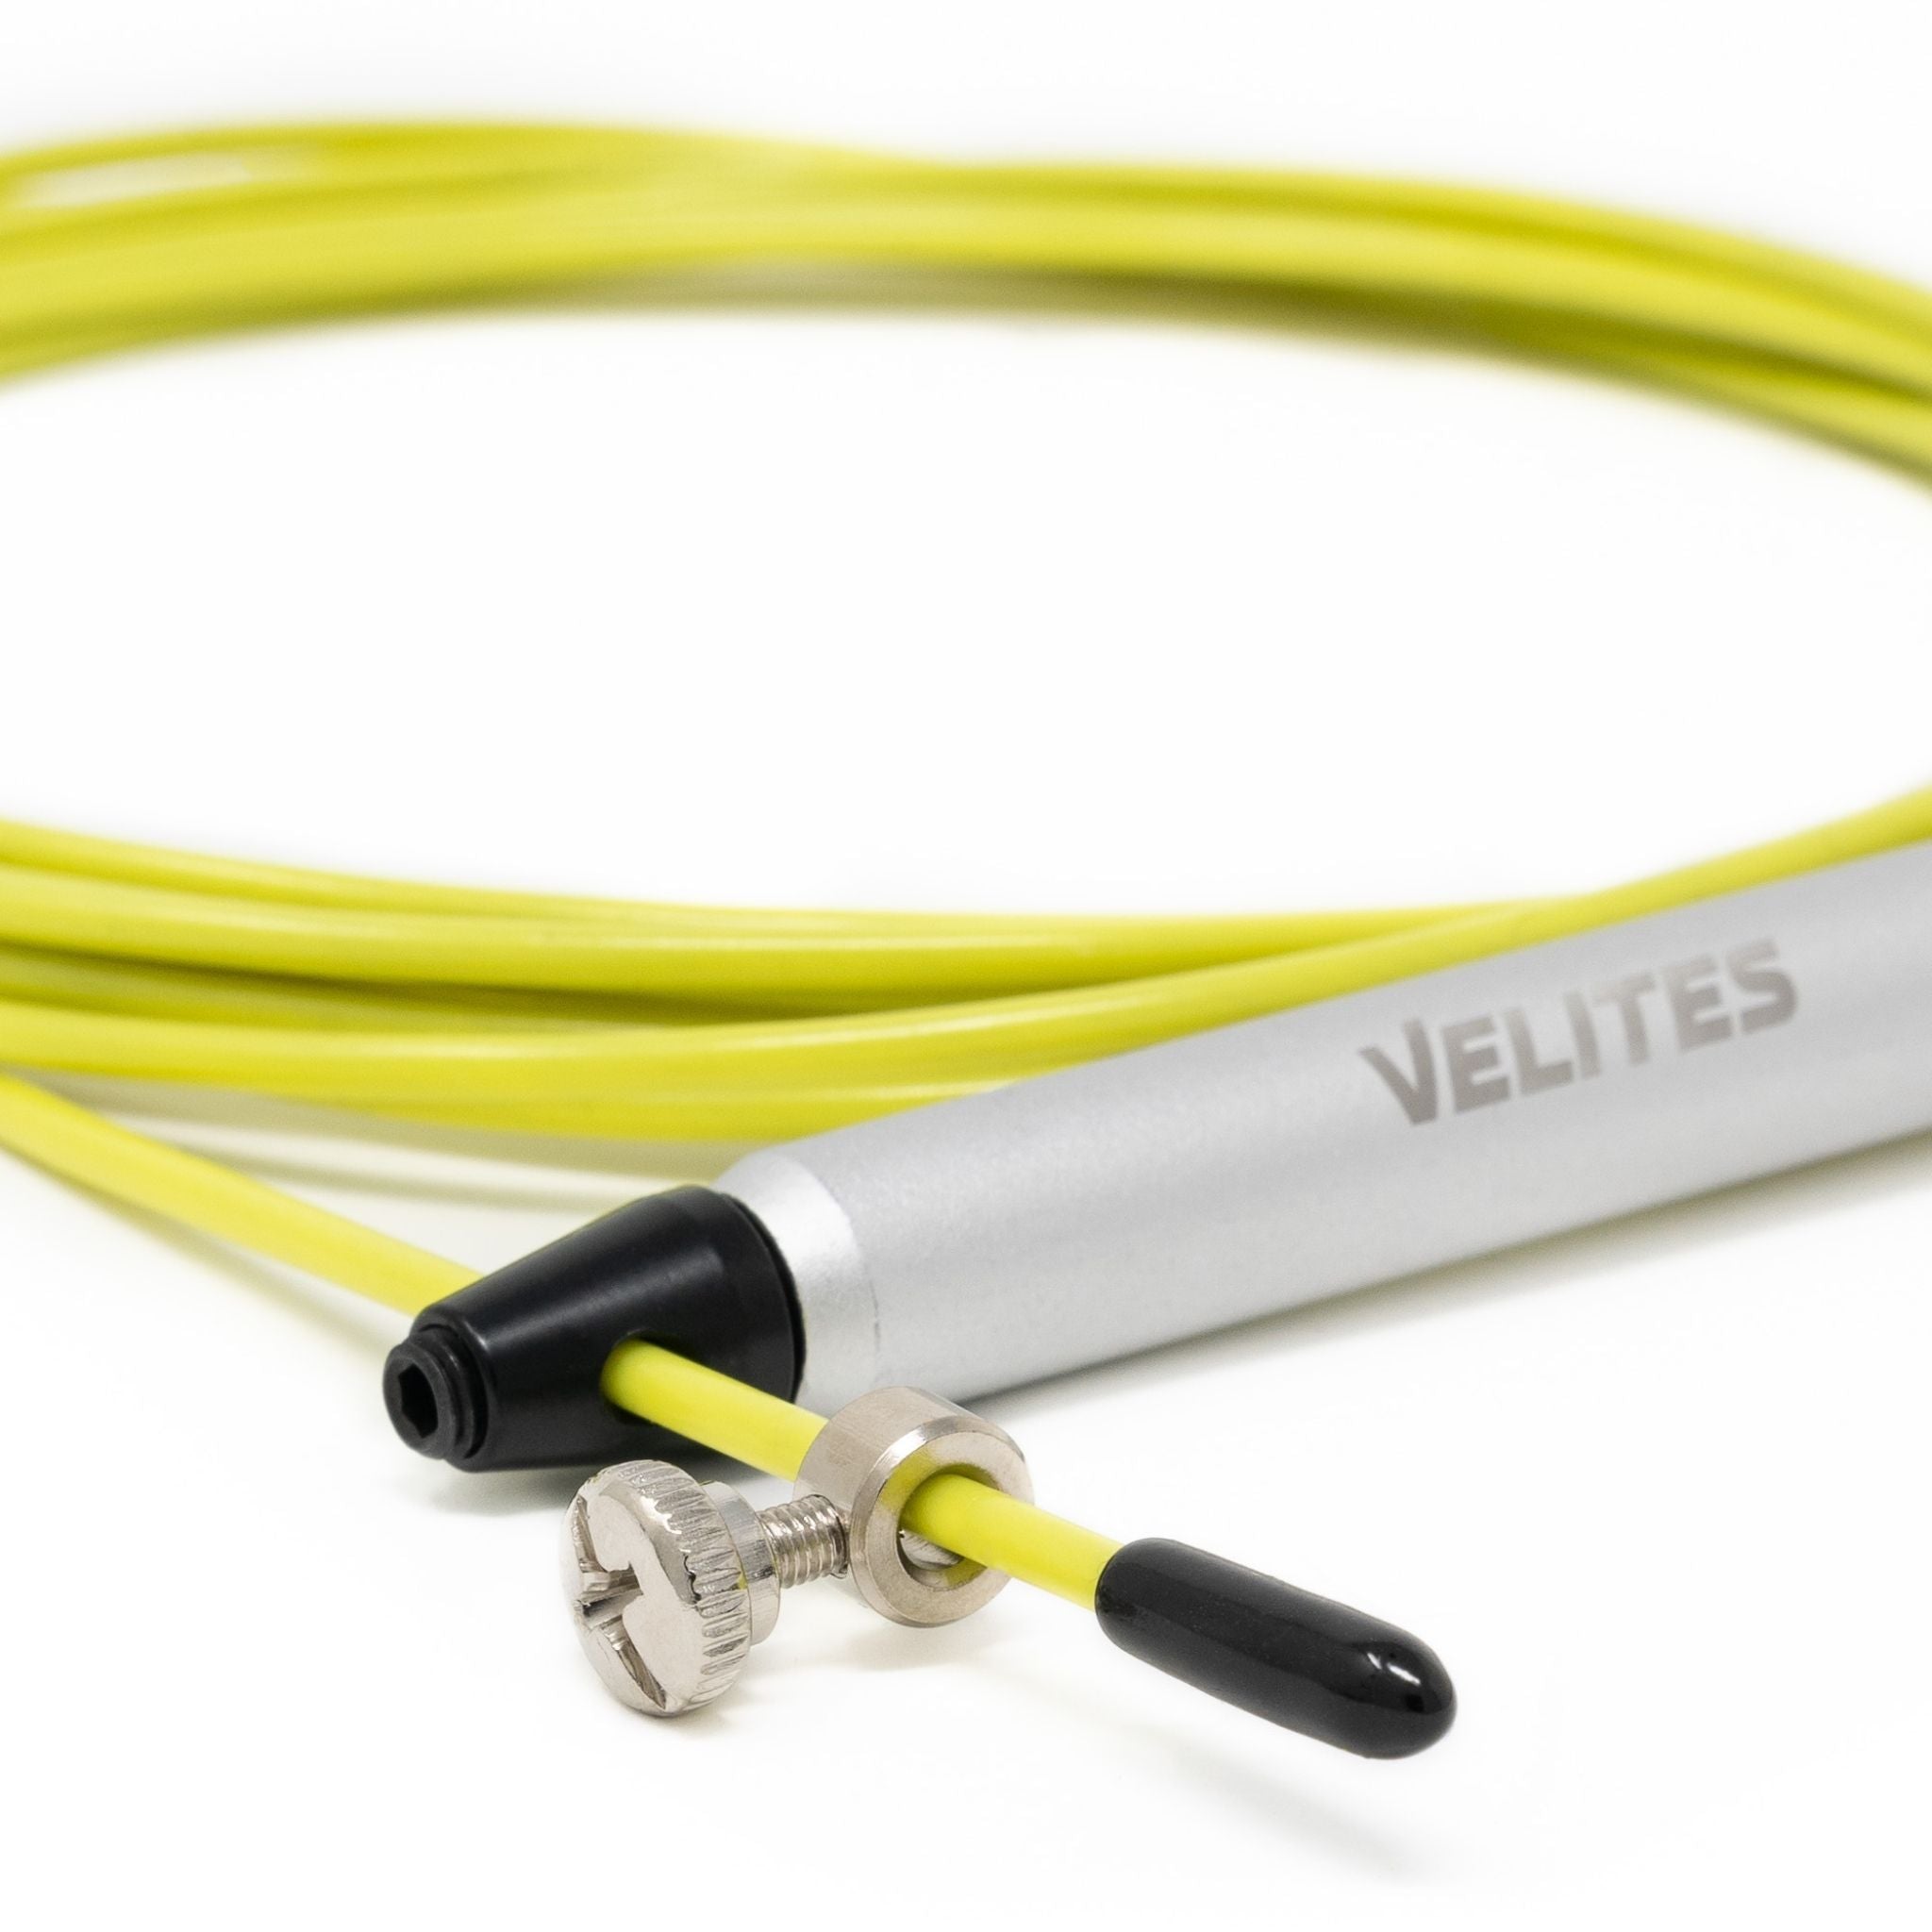 Jump Rope Fire 2.0 Silver